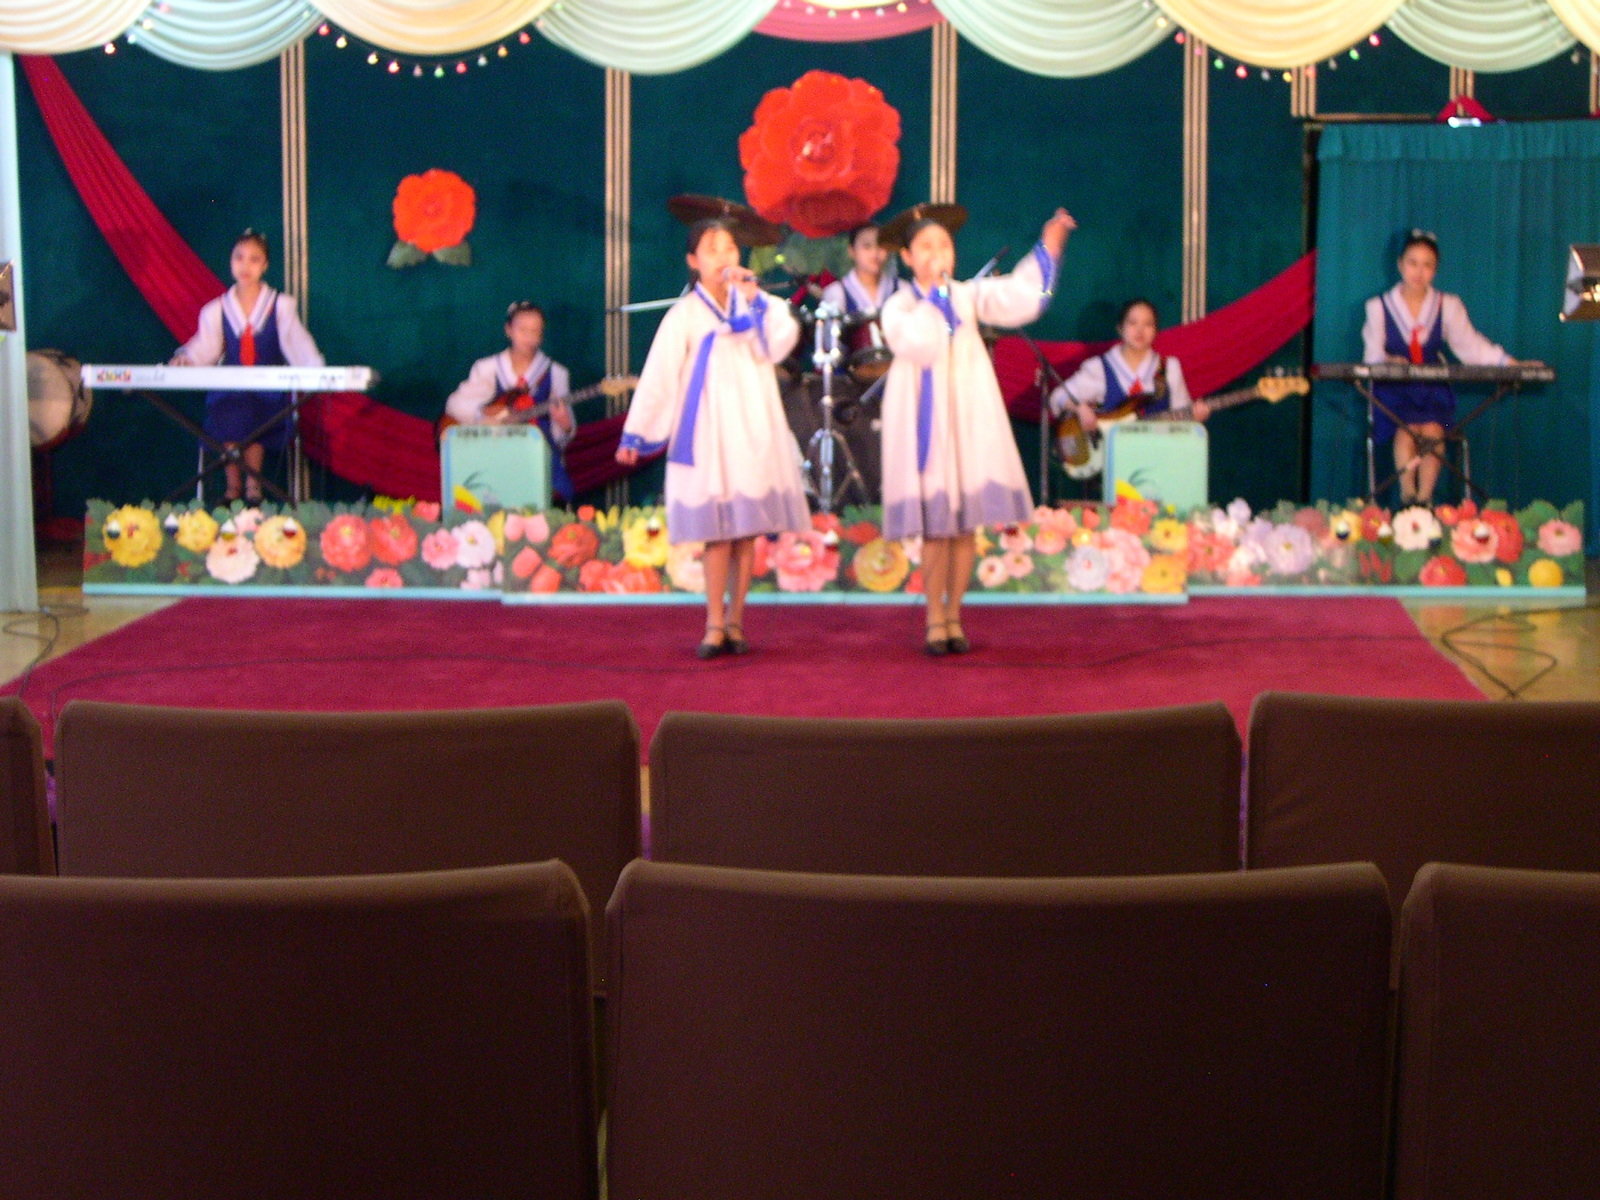 Two girls in folk dress perform a dance on a decorated scene